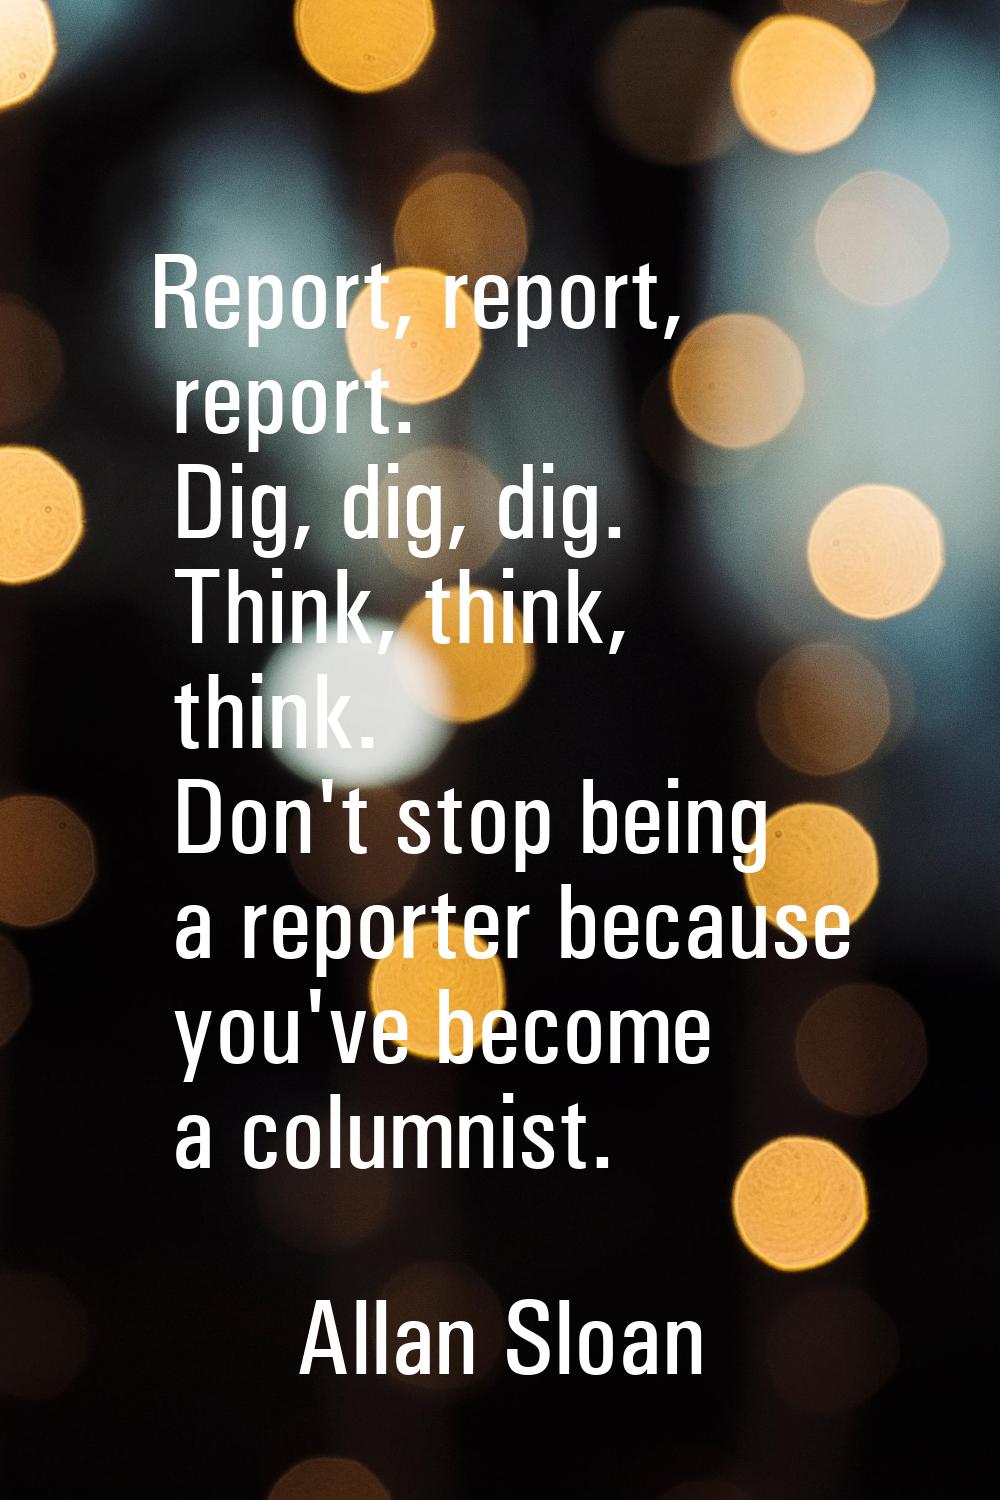 Report, report, report. Dig, dig, dig. Think, think, think. Don't stop being a reporter because you